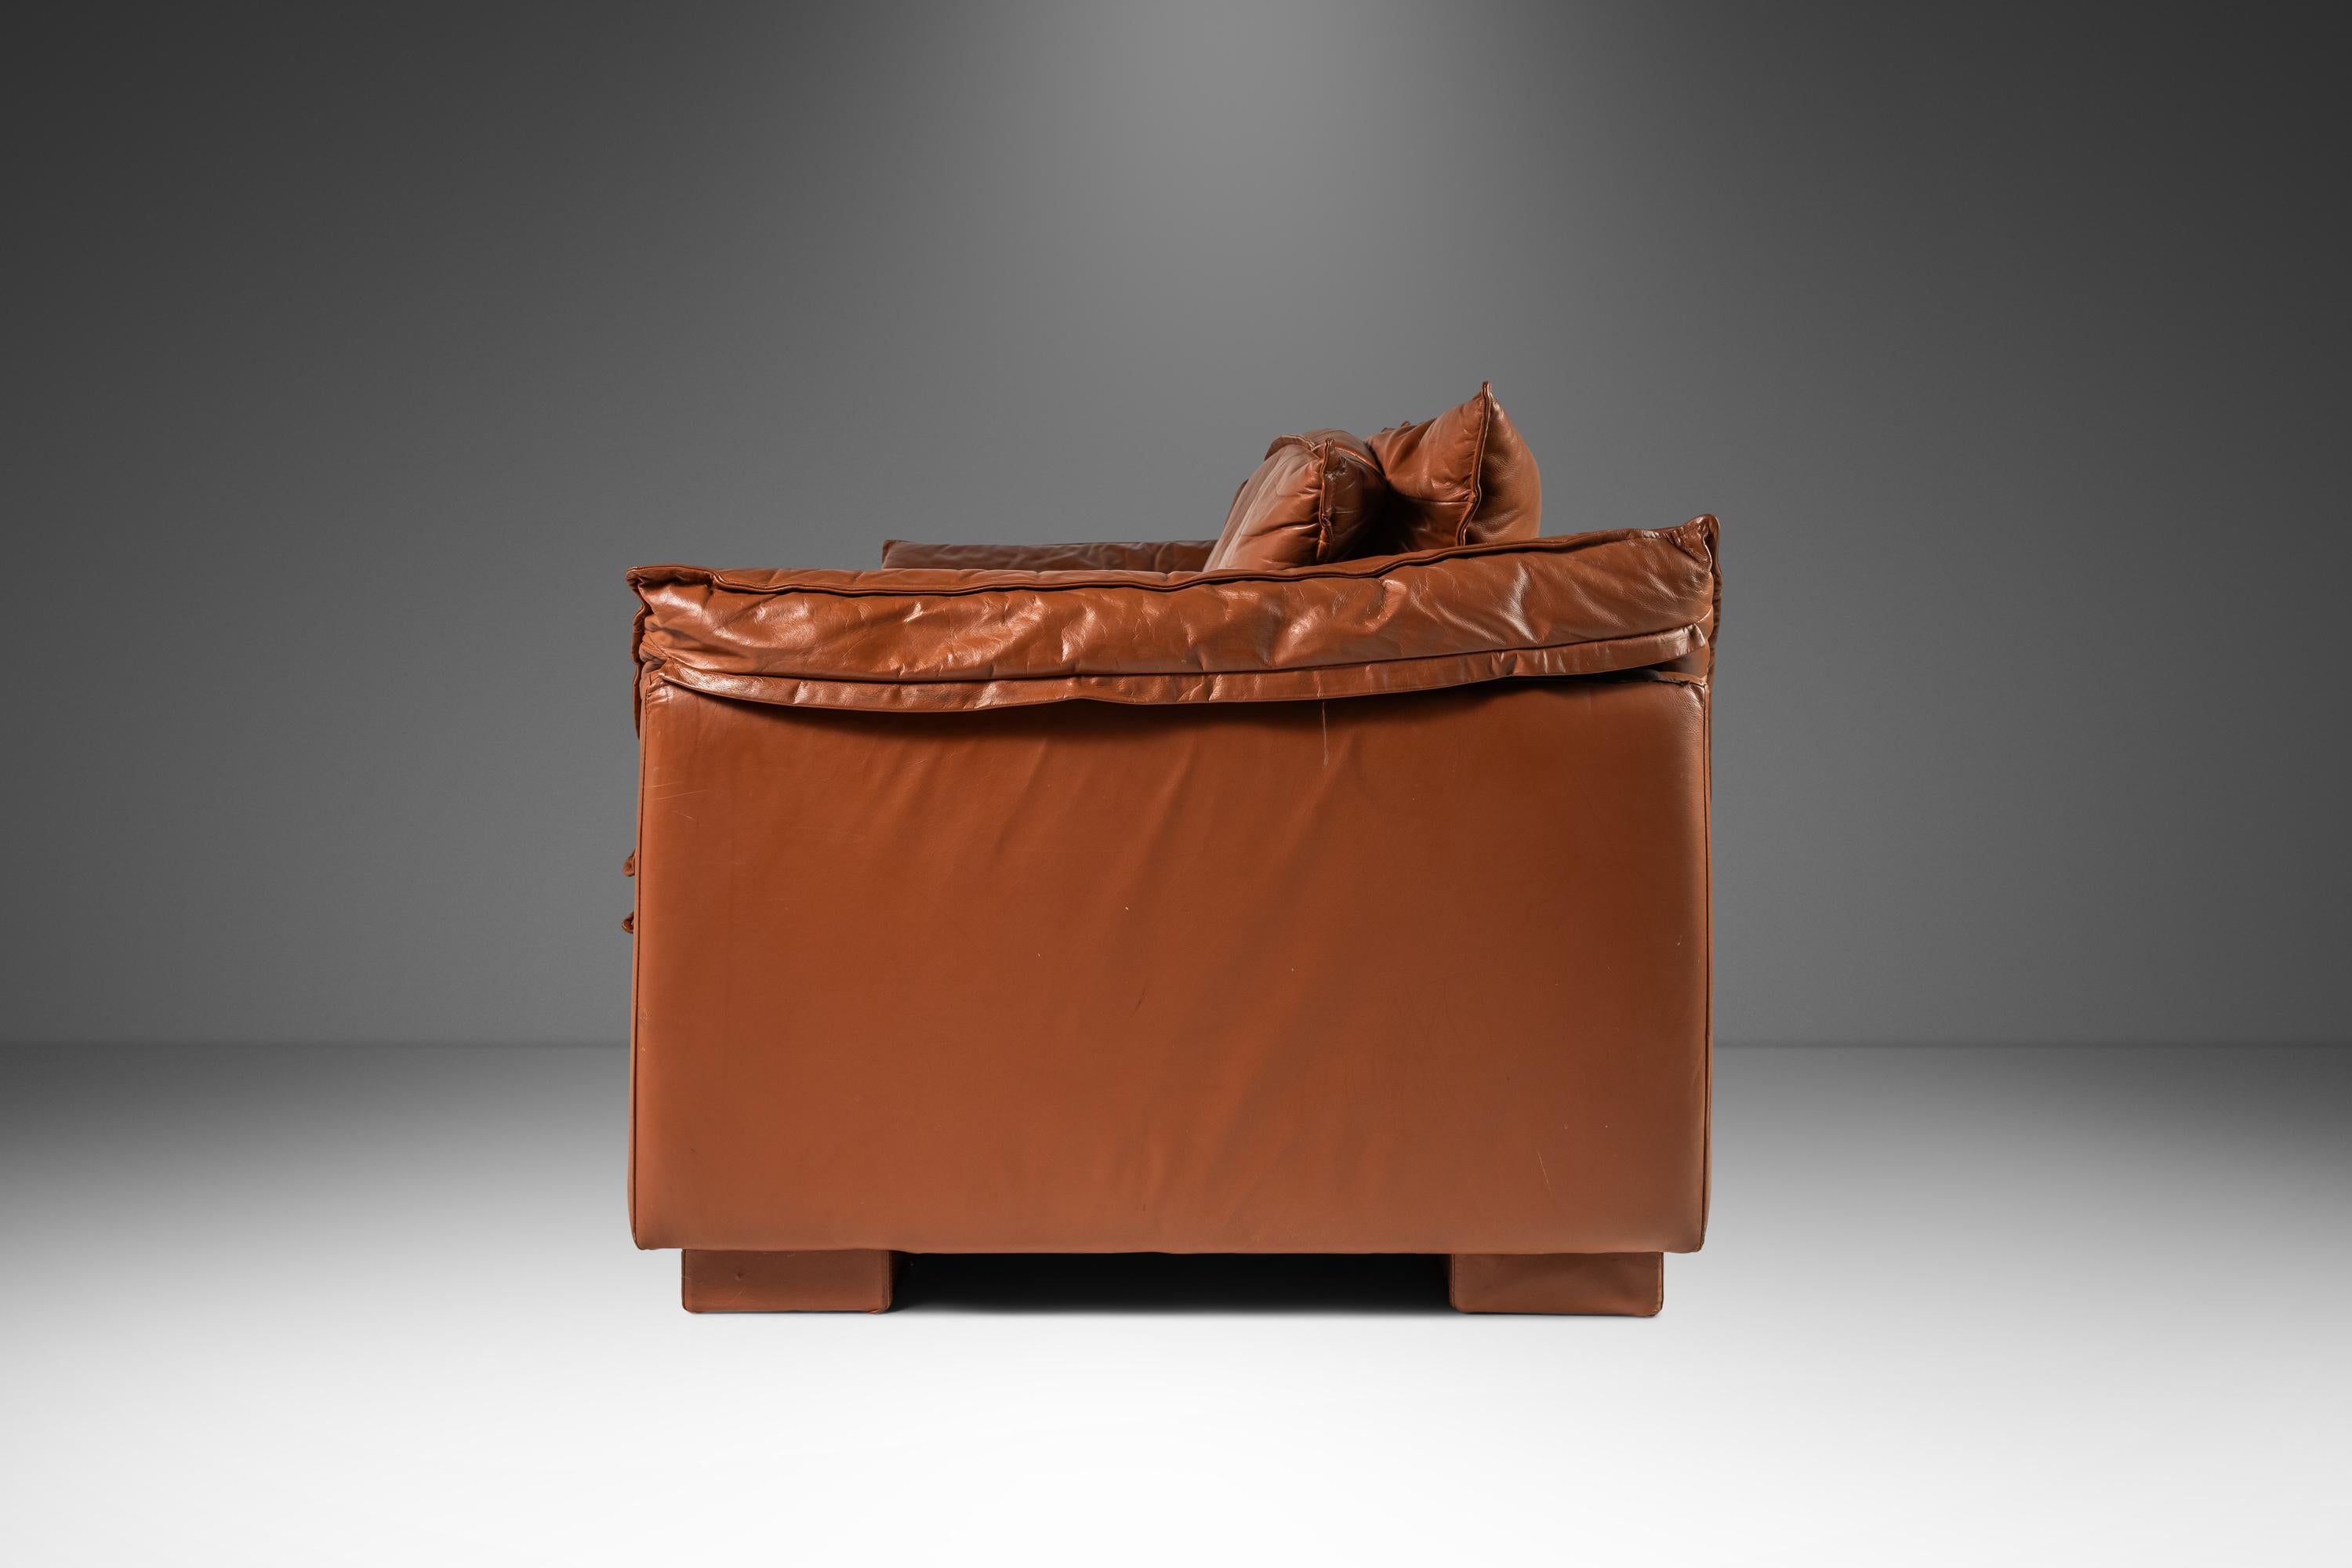 American Low Profile Loveseat Sofa in Leather in the Manner of Niels Eilersen, c. 1980's For Sale